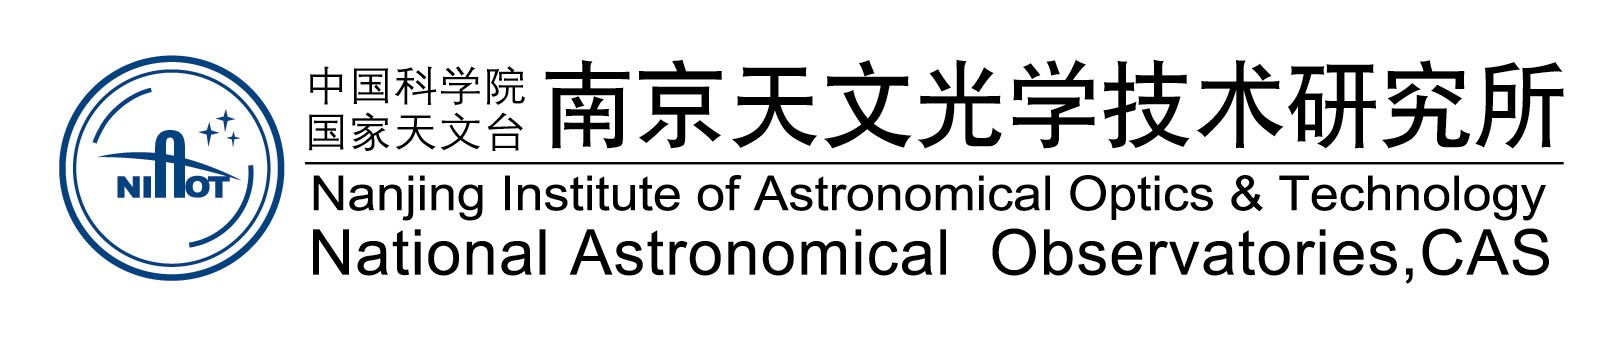 Nanjing Institute of Astronomial Optics & Technology, CAS